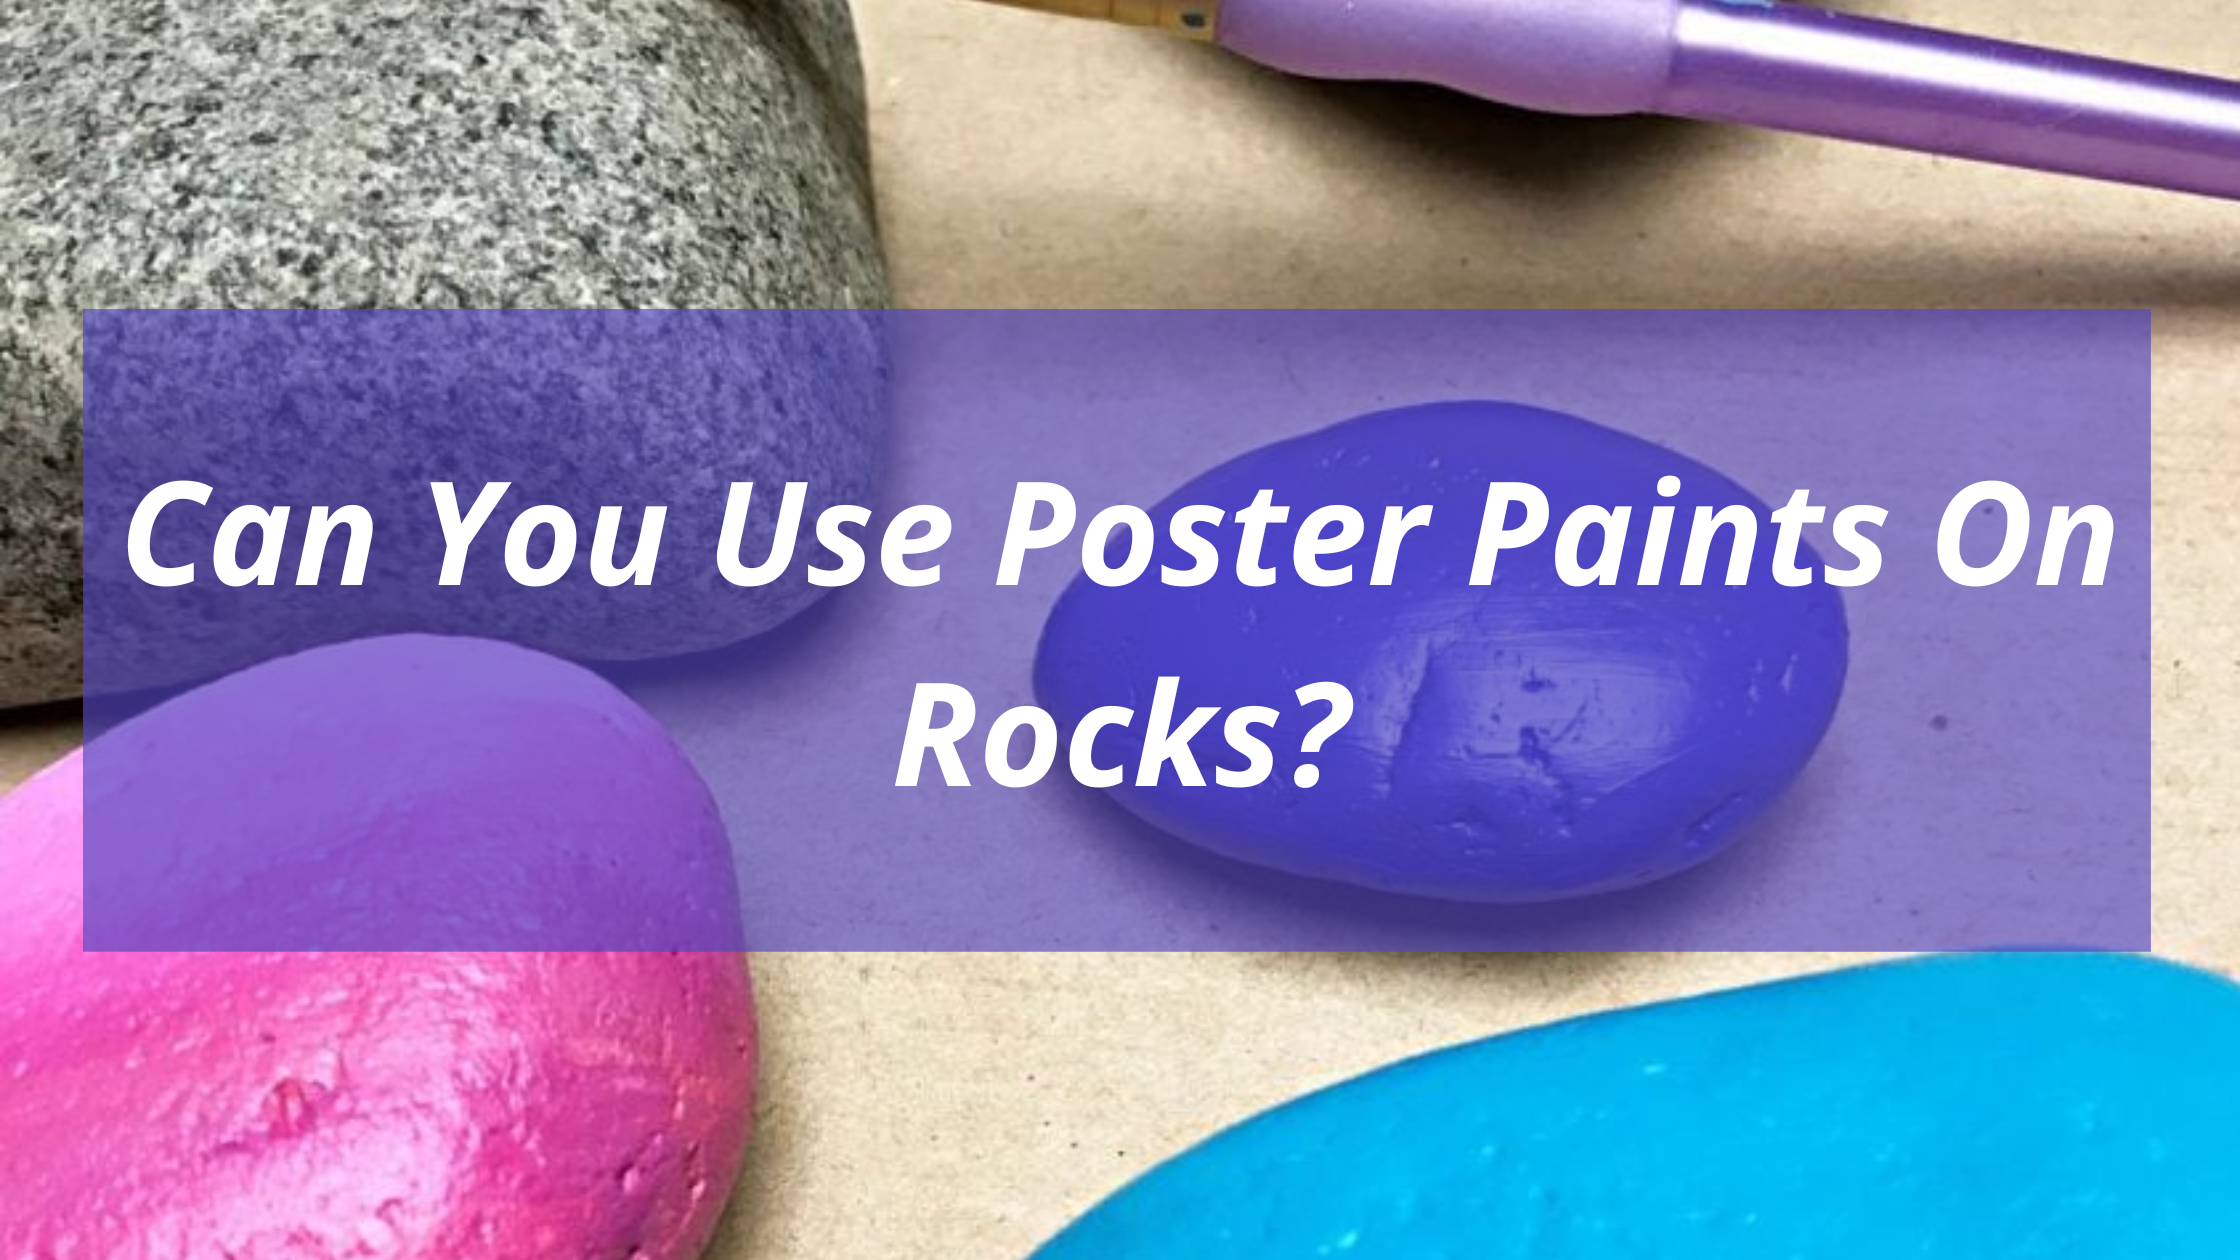 Can You Use Poster Paints On Rocks?